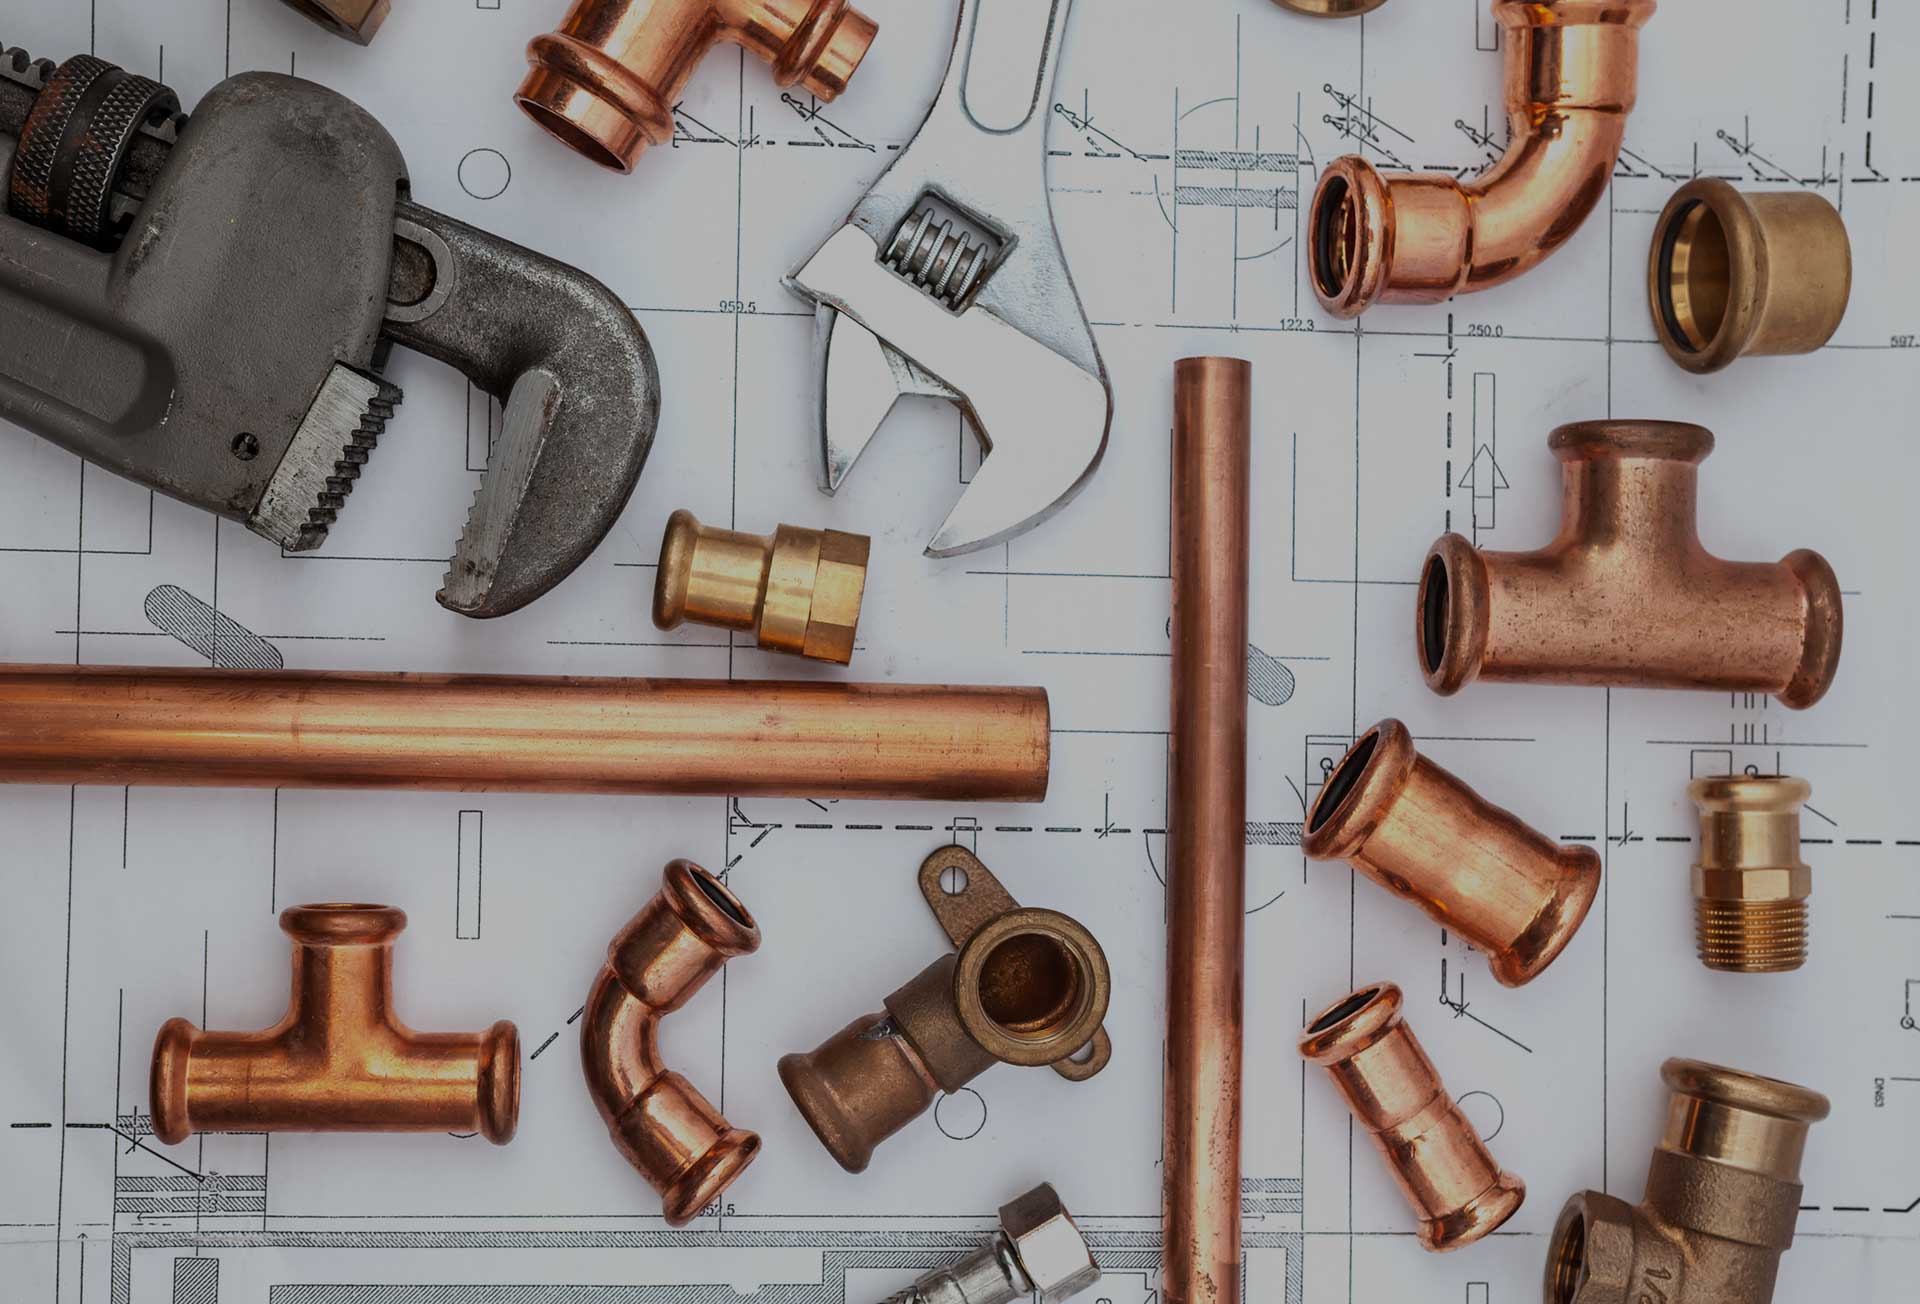 Copper Piping on blueprints